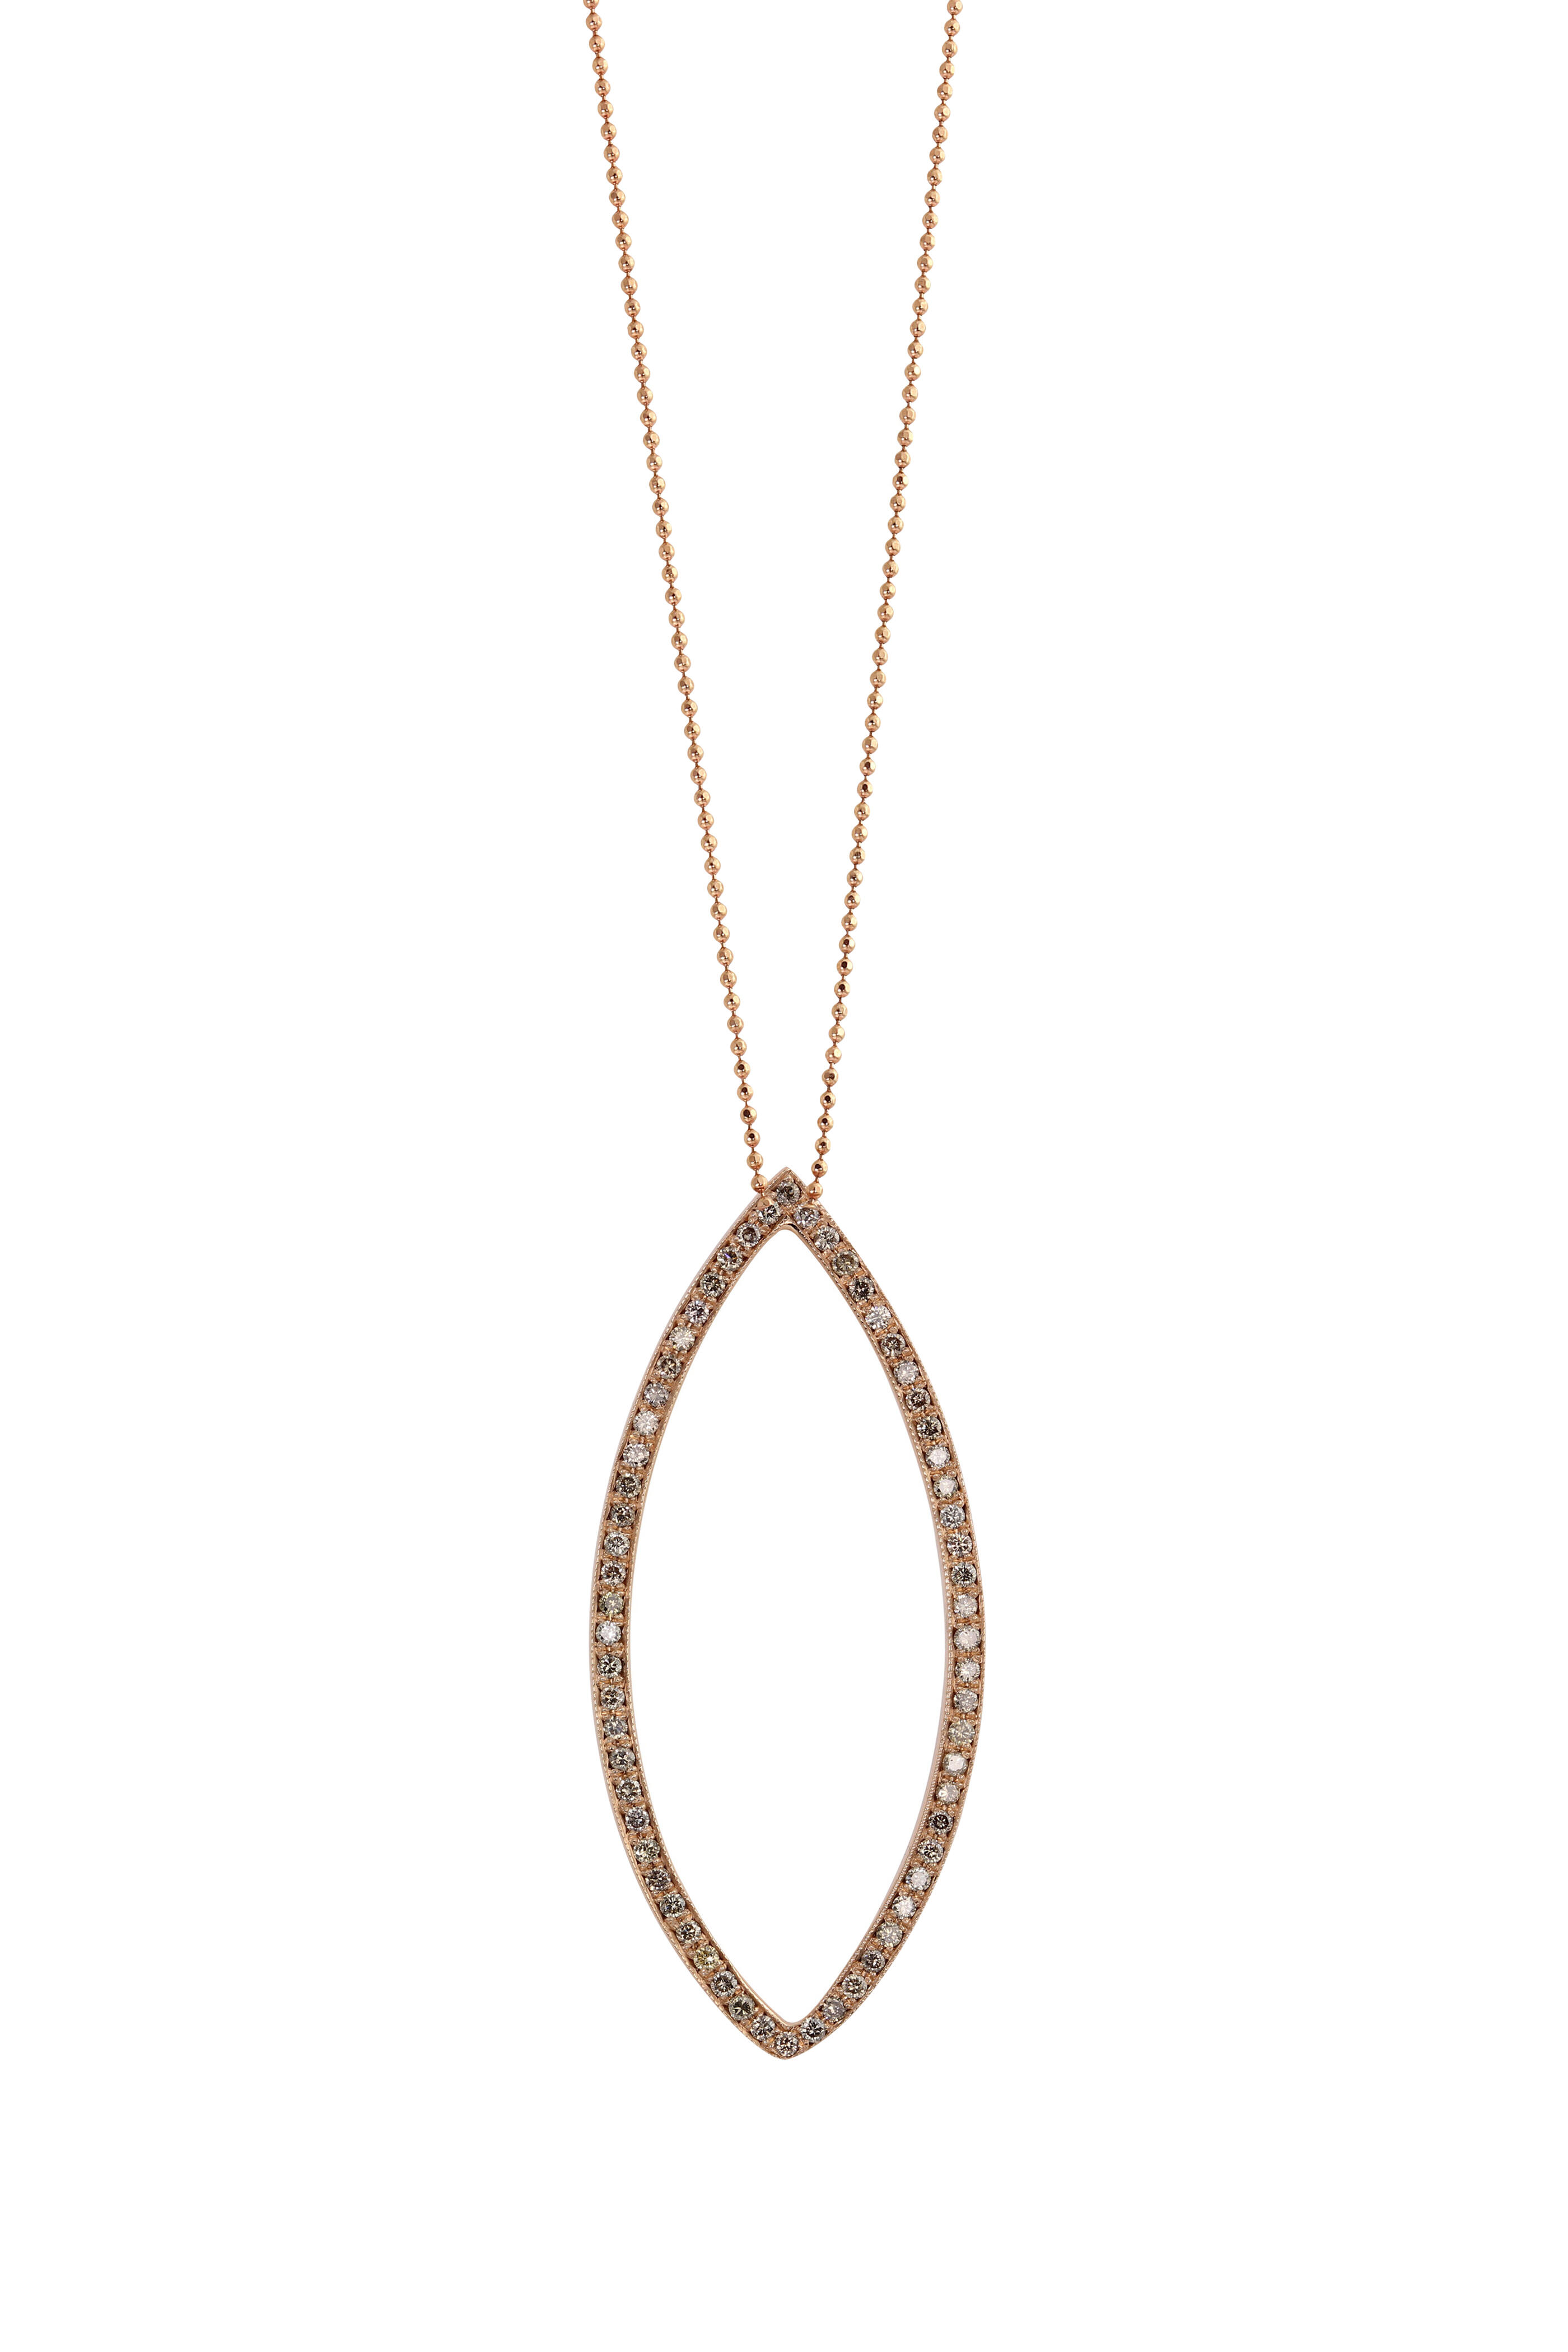 Julez Bryant 14K Gold Ball Chain Necklace Rose Gold